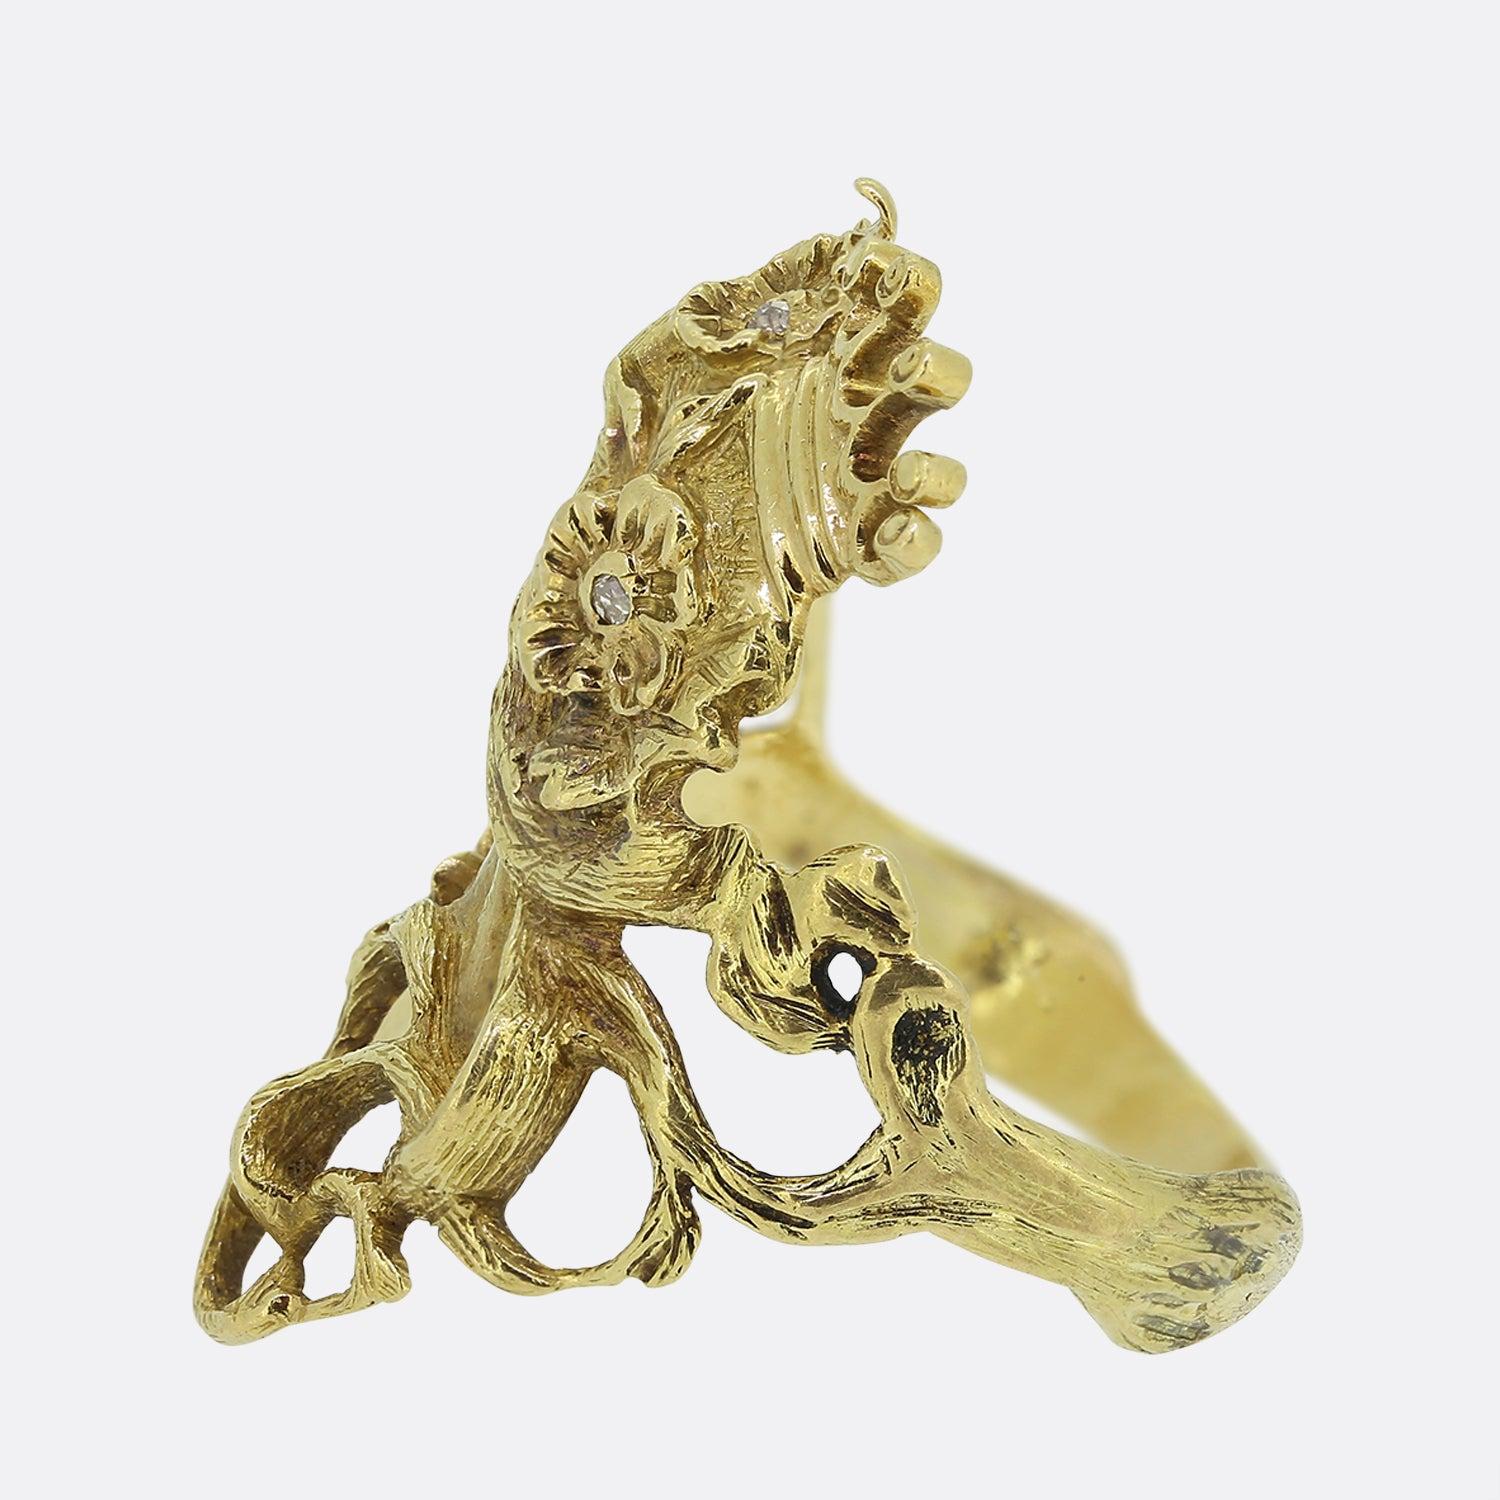 Here we have an excellently crafted 14ct yellow gold ring. This piece is characterised by a stylised female profile featuring sculptural, flowing locks and intricately engraved florals. Three single cut white diamonds punctuate the centre of each